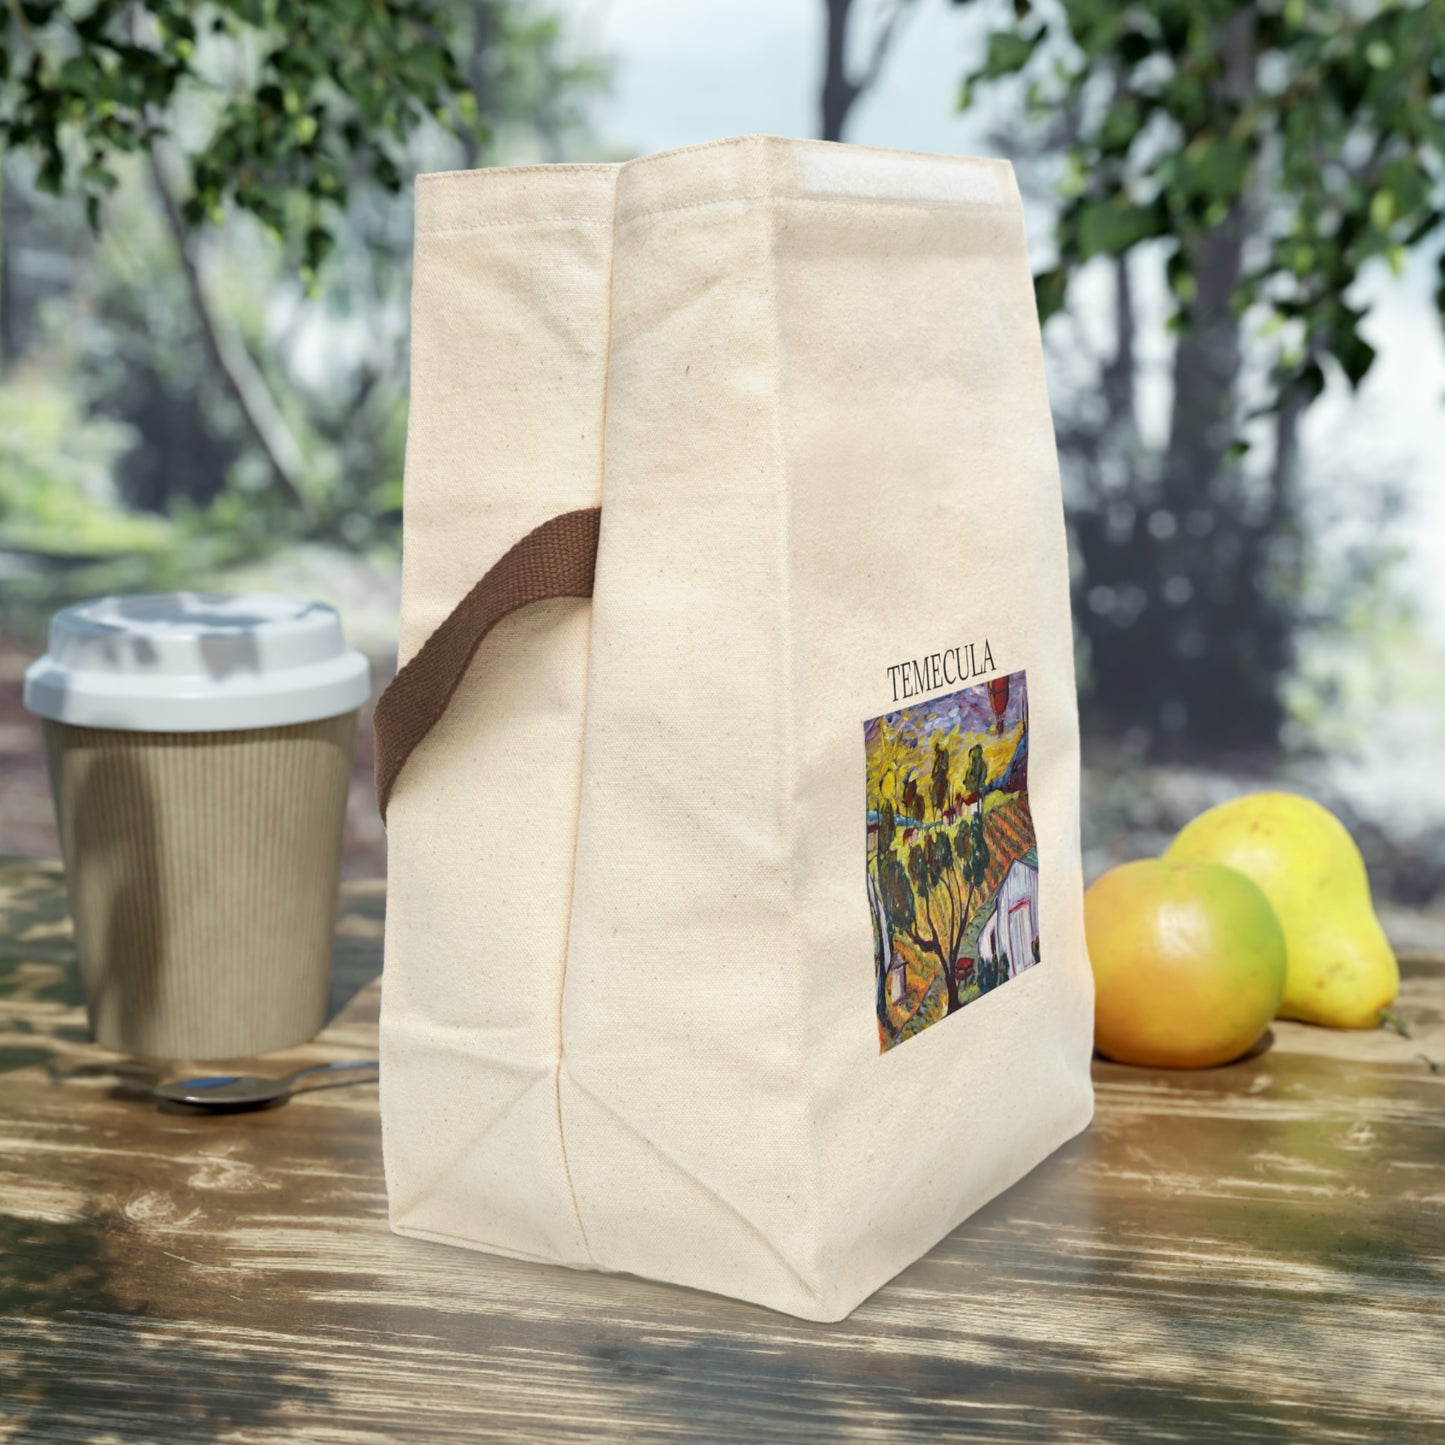 Ultimate Sunrise "Temecula" Canvas Lunch Bag With Strap